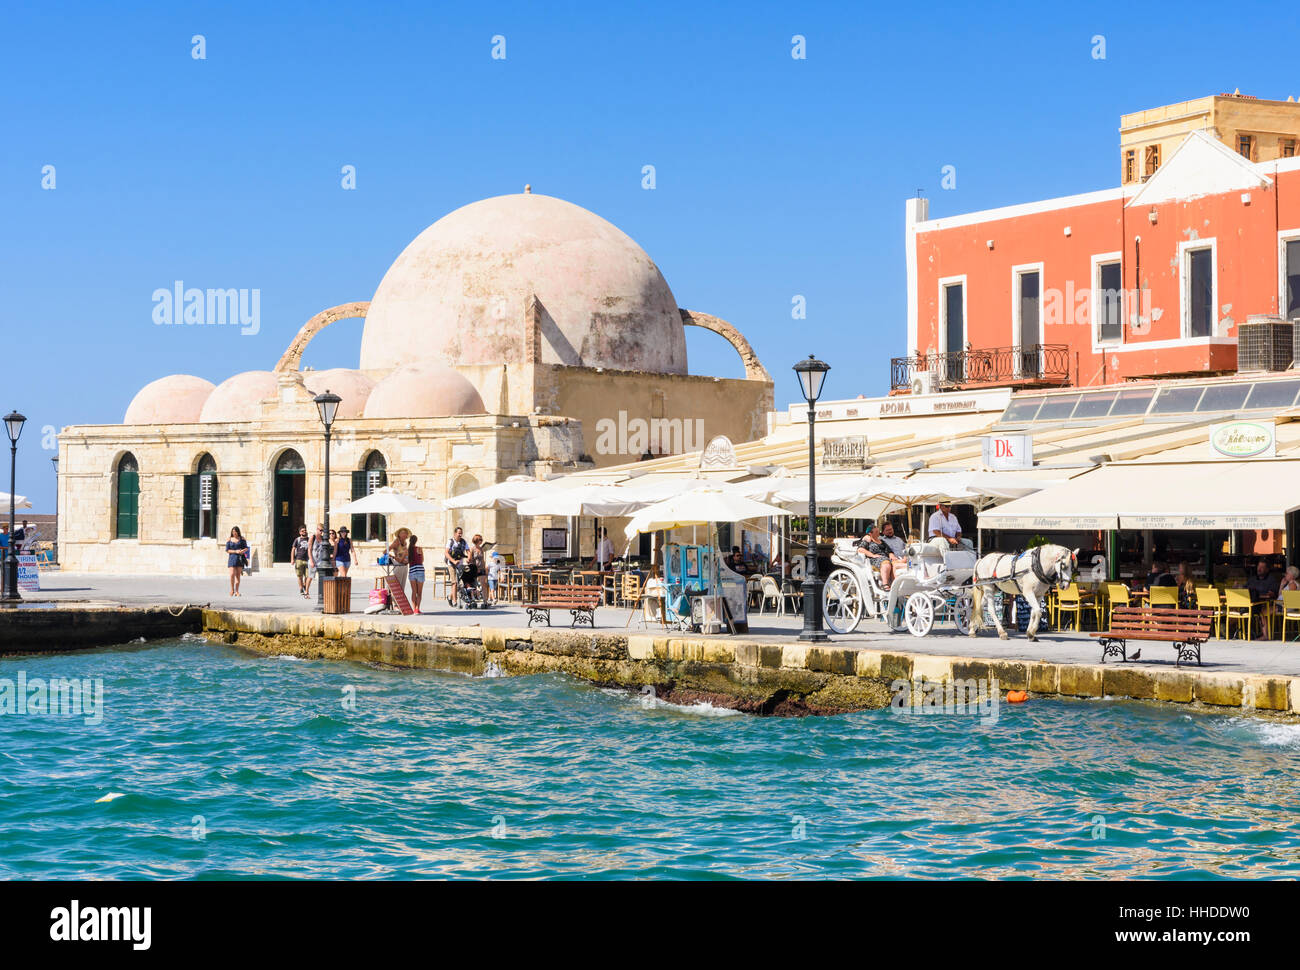 Chania's Mosque of the Janissaries in the old Venetian Harbour, Chania, Crete, Greece Stock Photo